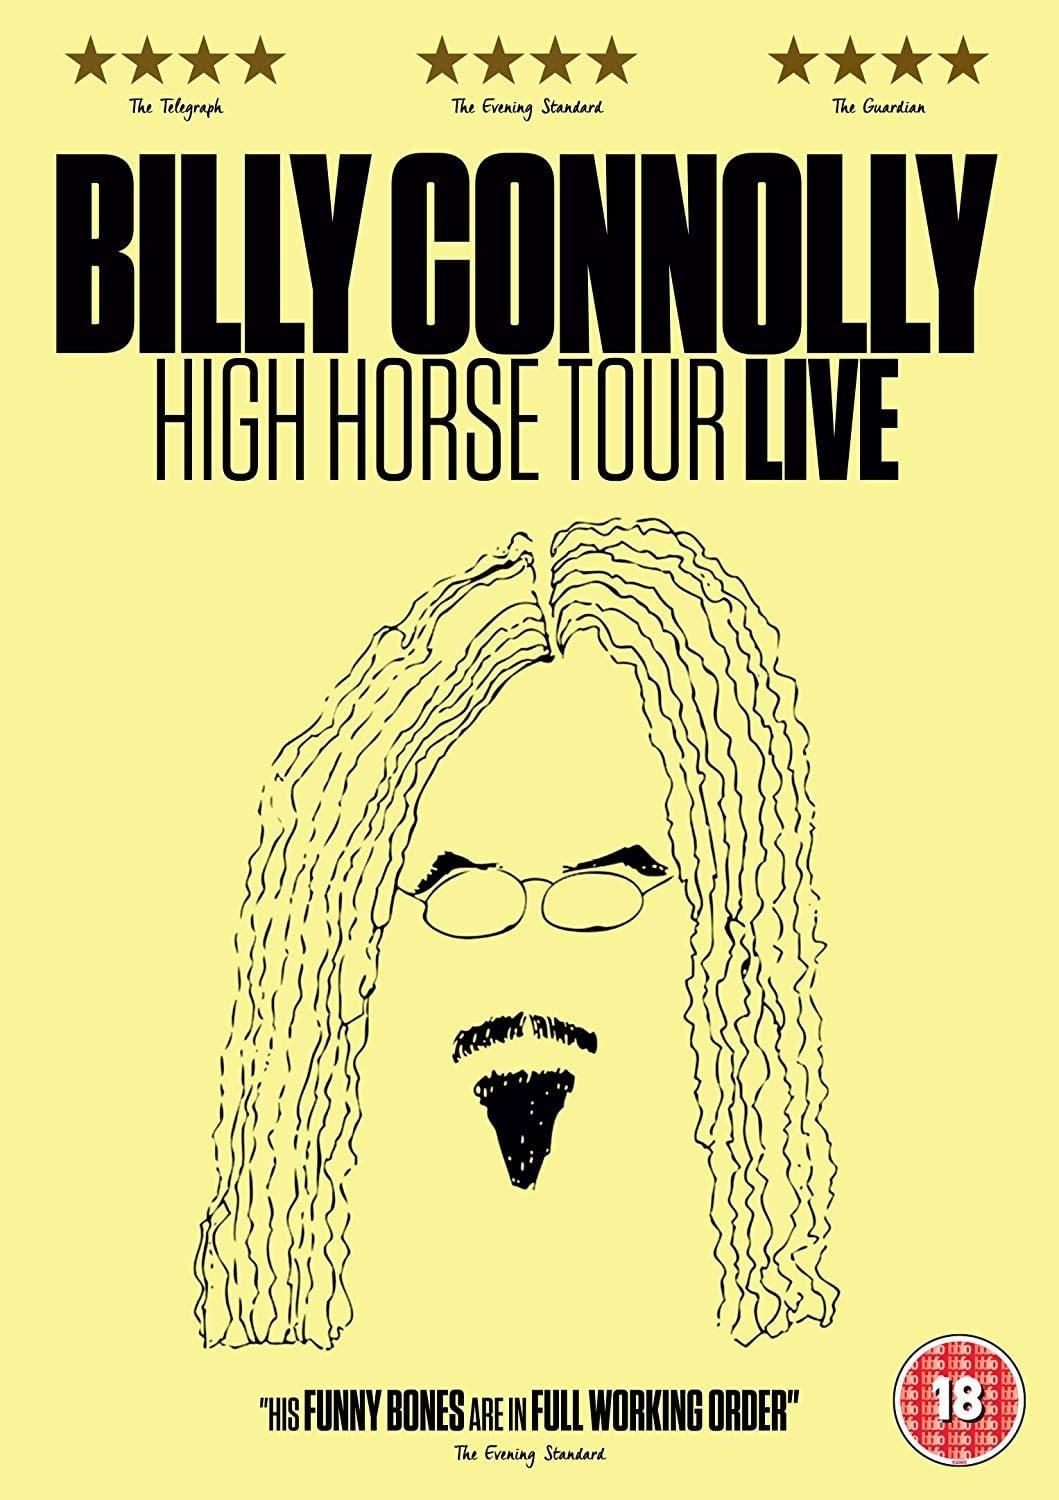 Billy Connolly: High Horse Tour Live poster